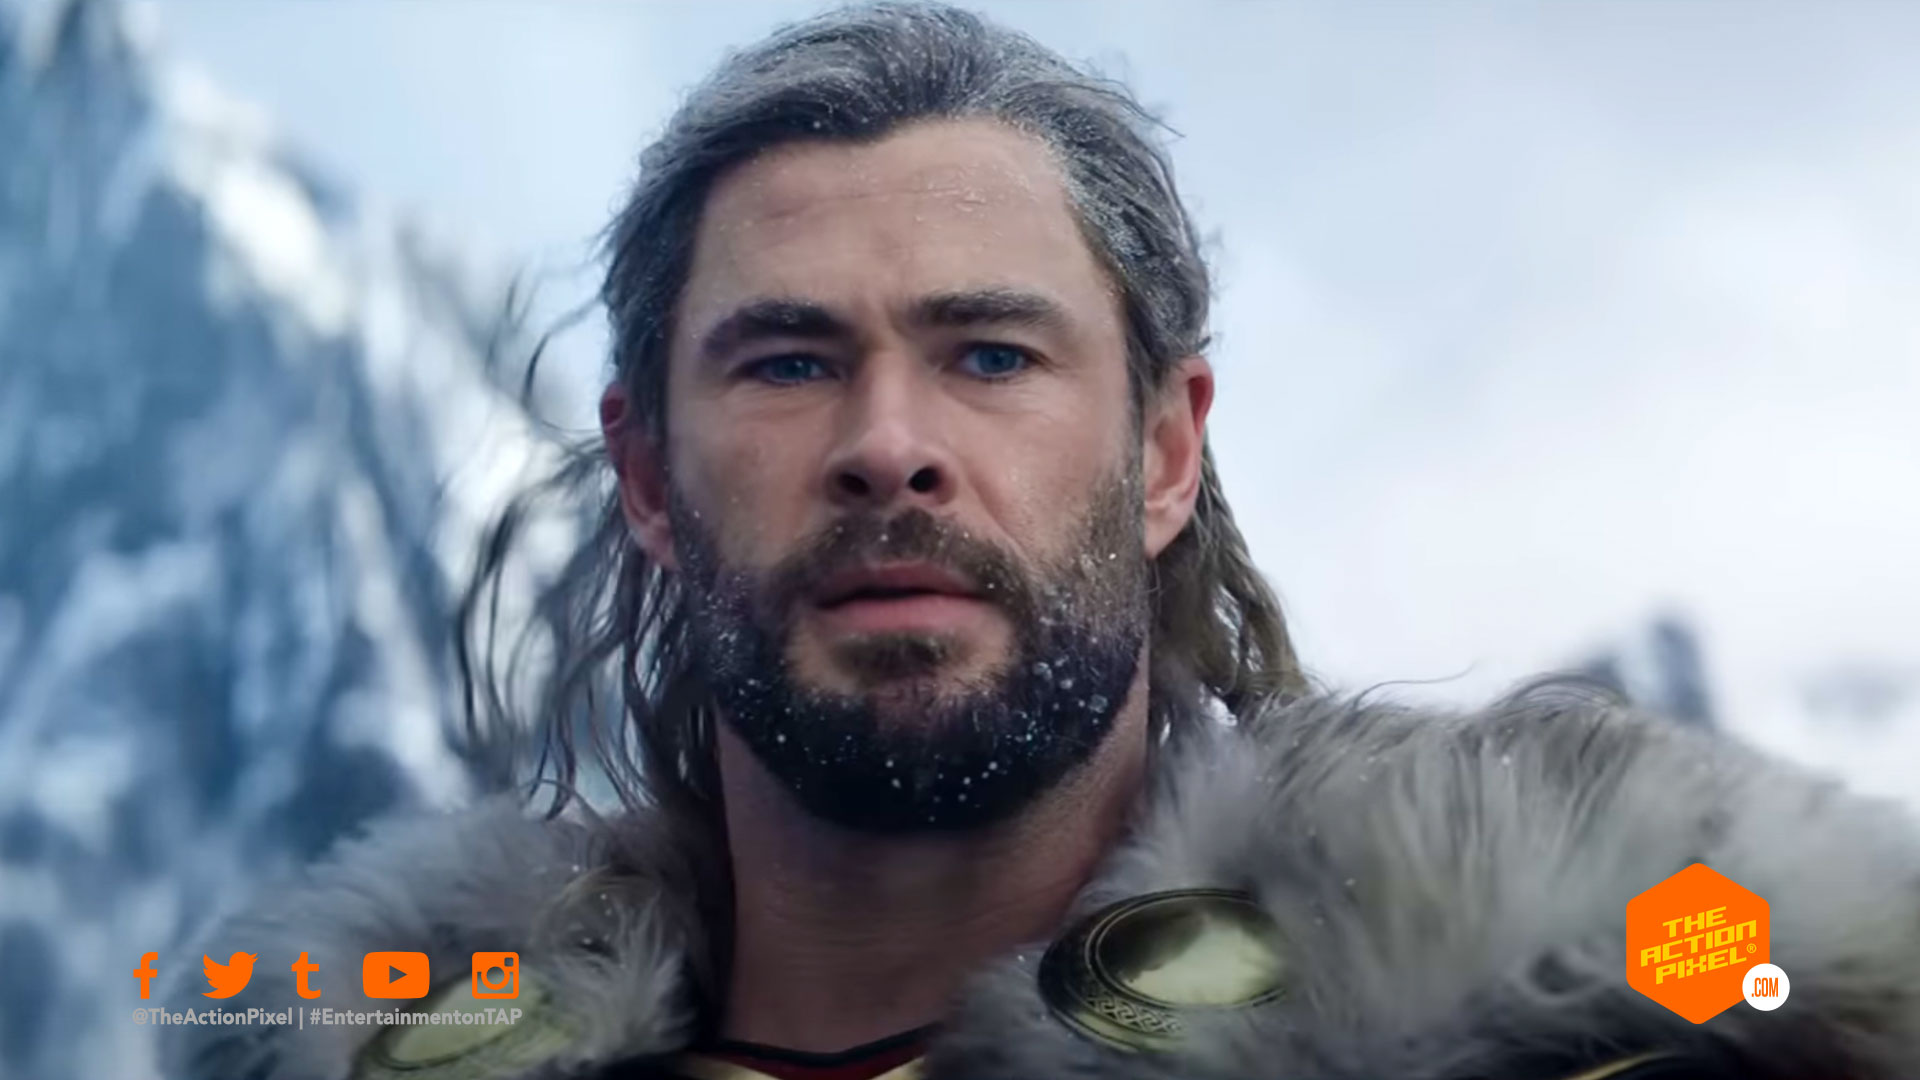 thor love and thunder, Chris Hemsworth,thor: love and thunder, marvel, marvel studios, featured, entertainment on tap,